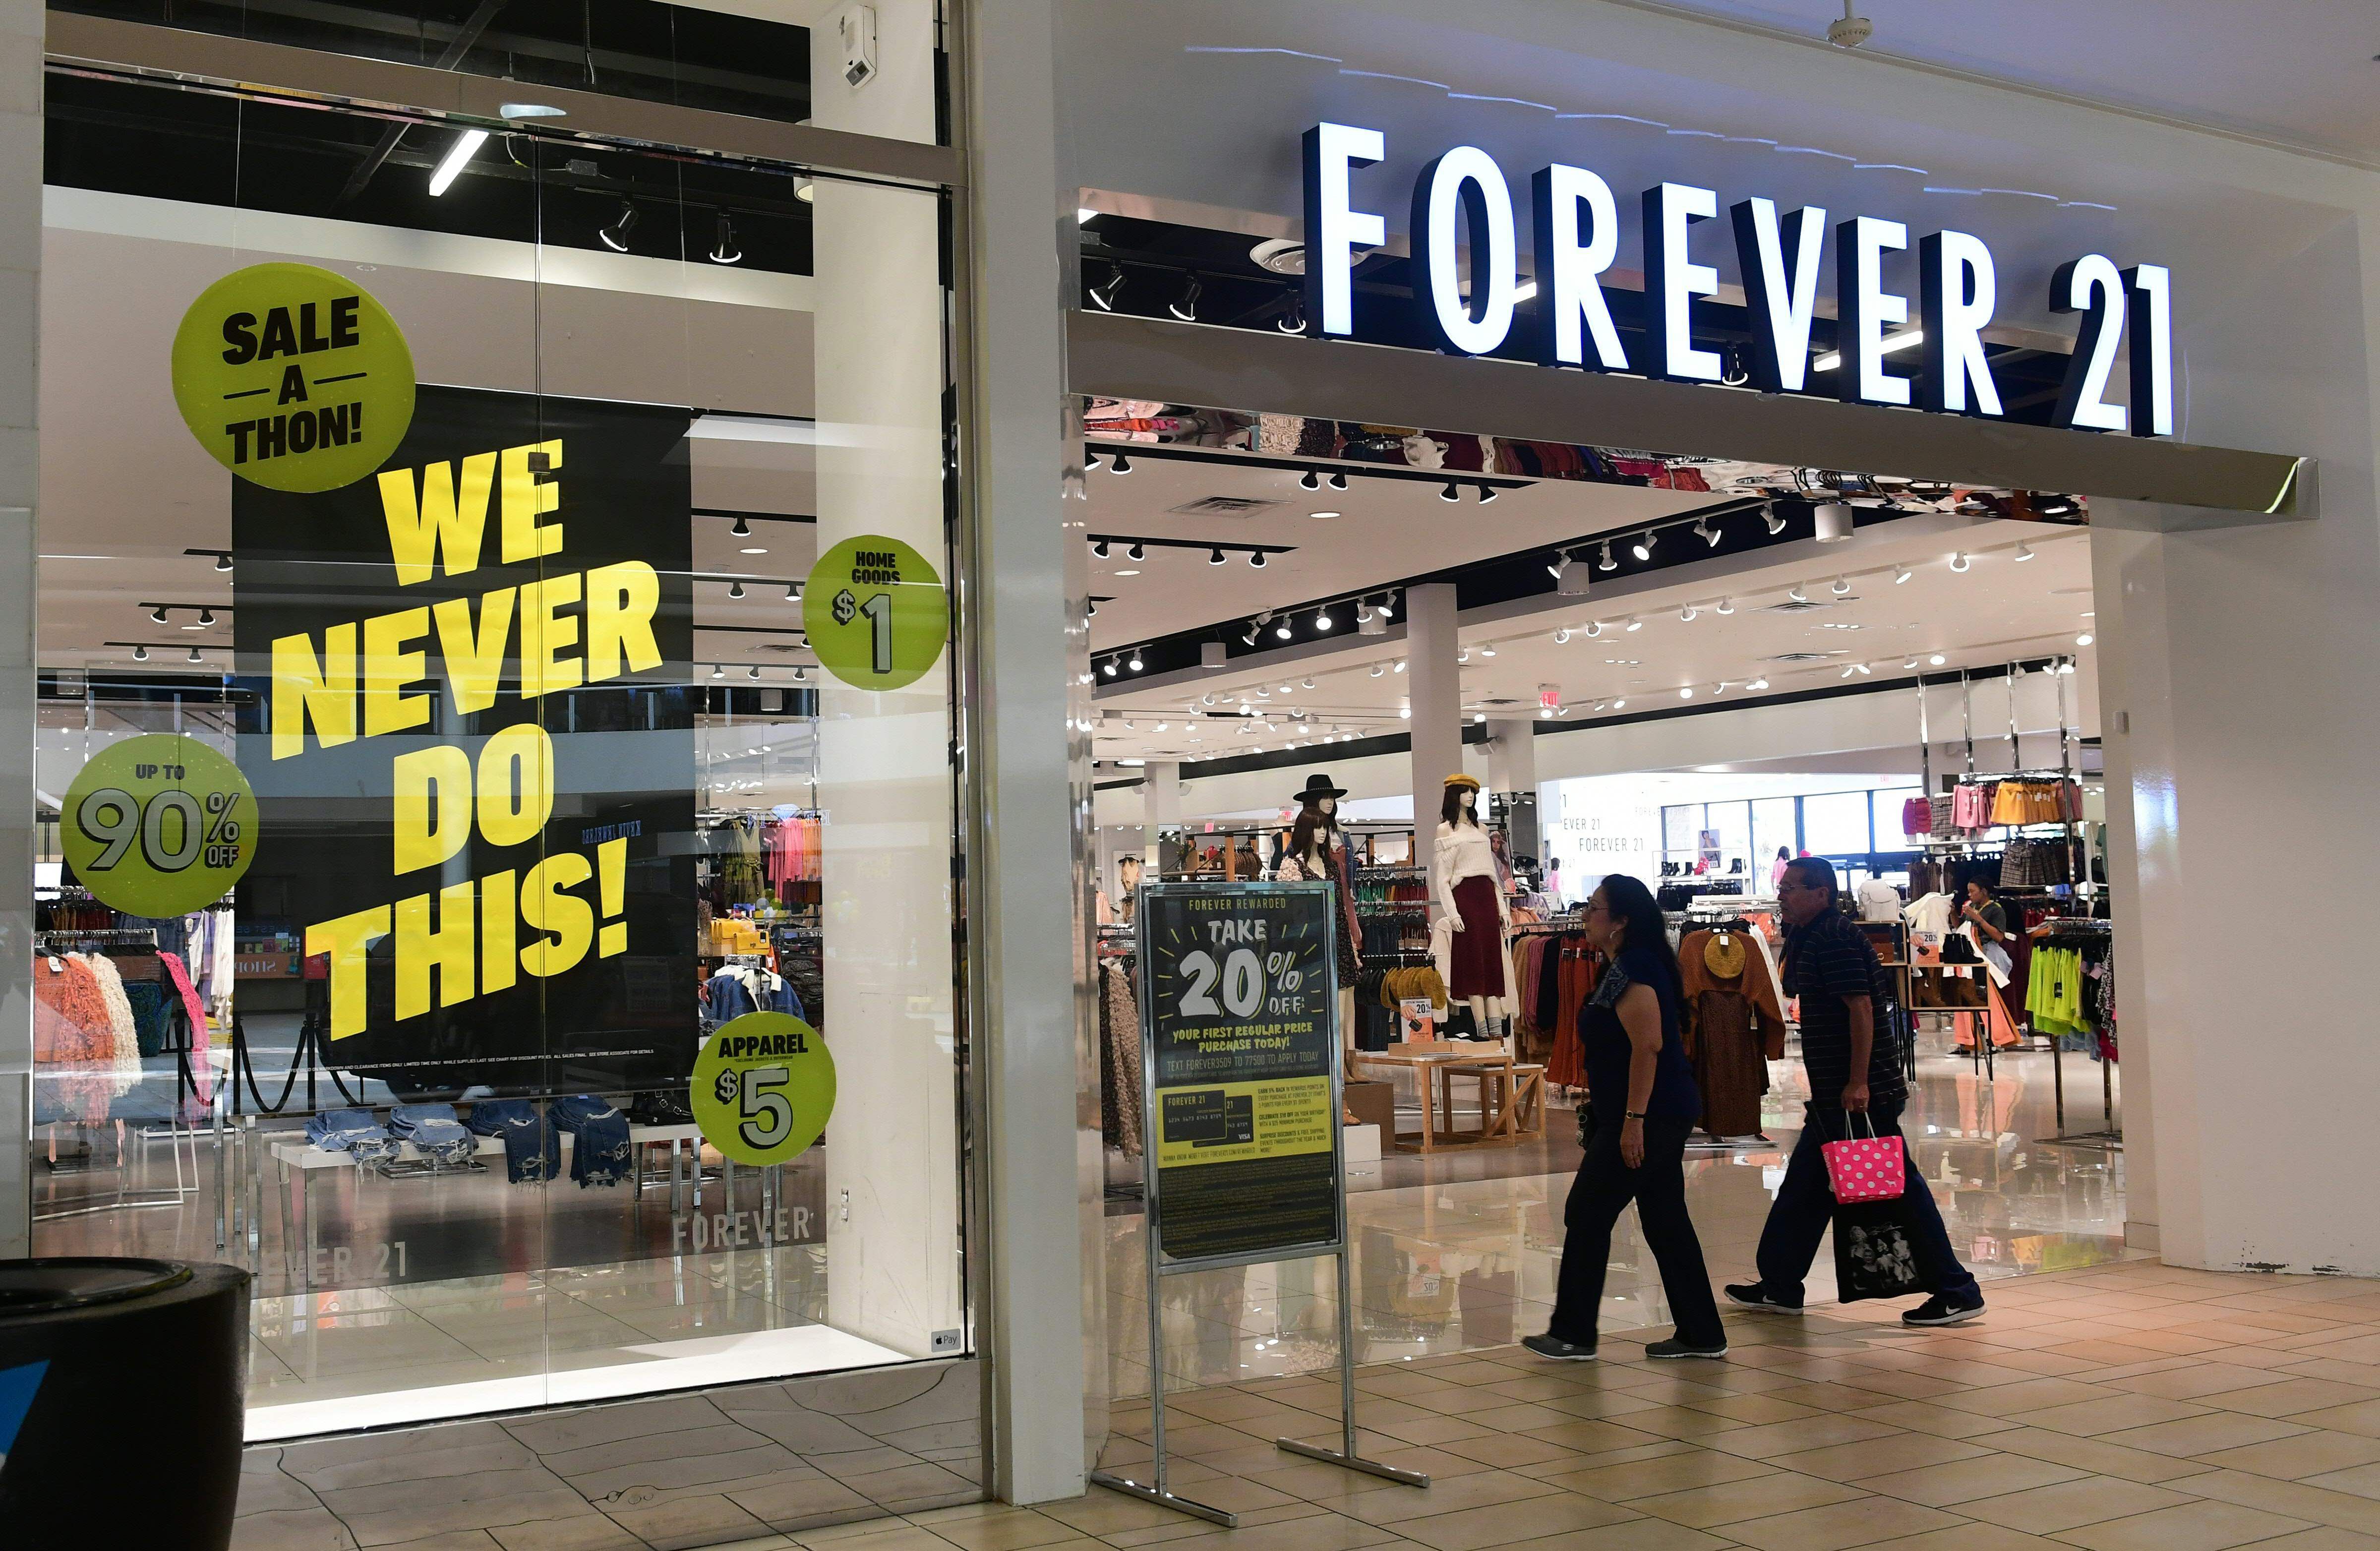 Forever 21 files for bankruptcy - The Boston Globe